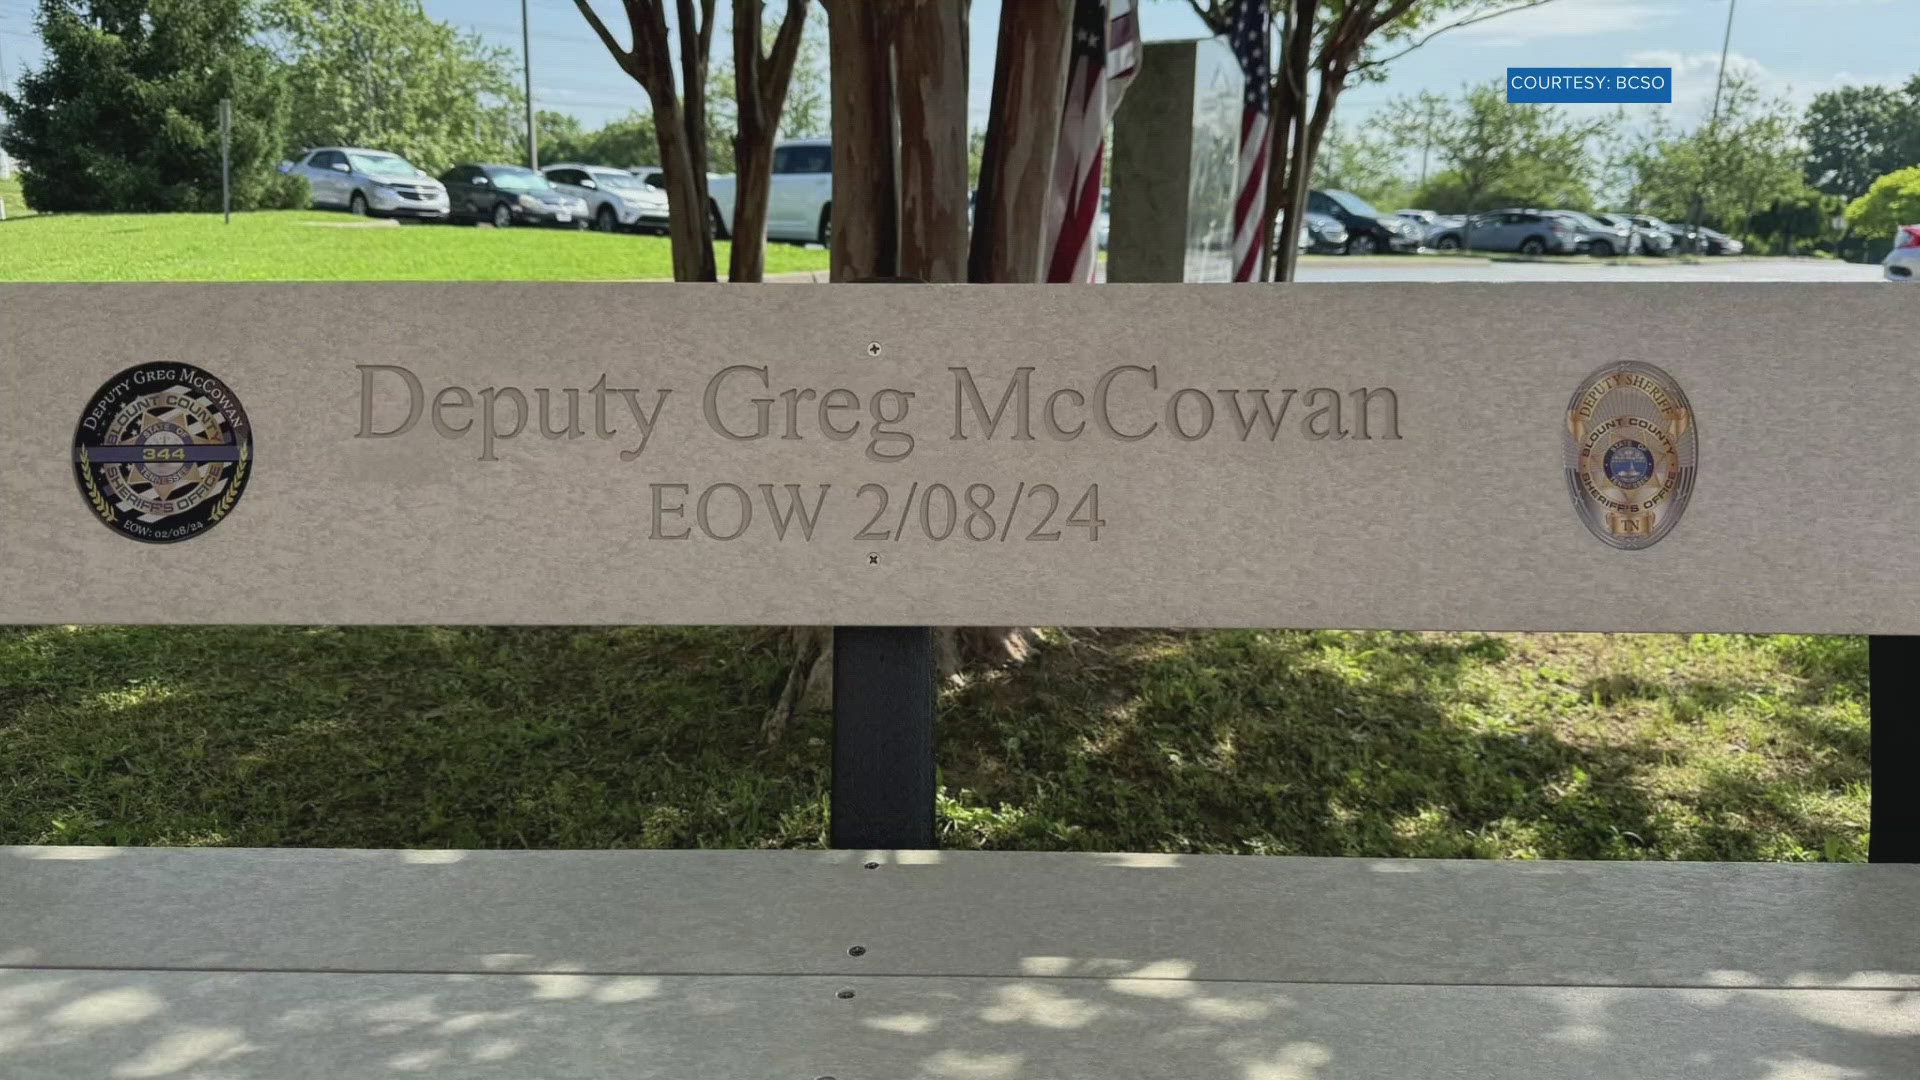 The bench sits in the memorial garden in front of the Blount County Justice Center, the Blount County Sheriff's Office said.